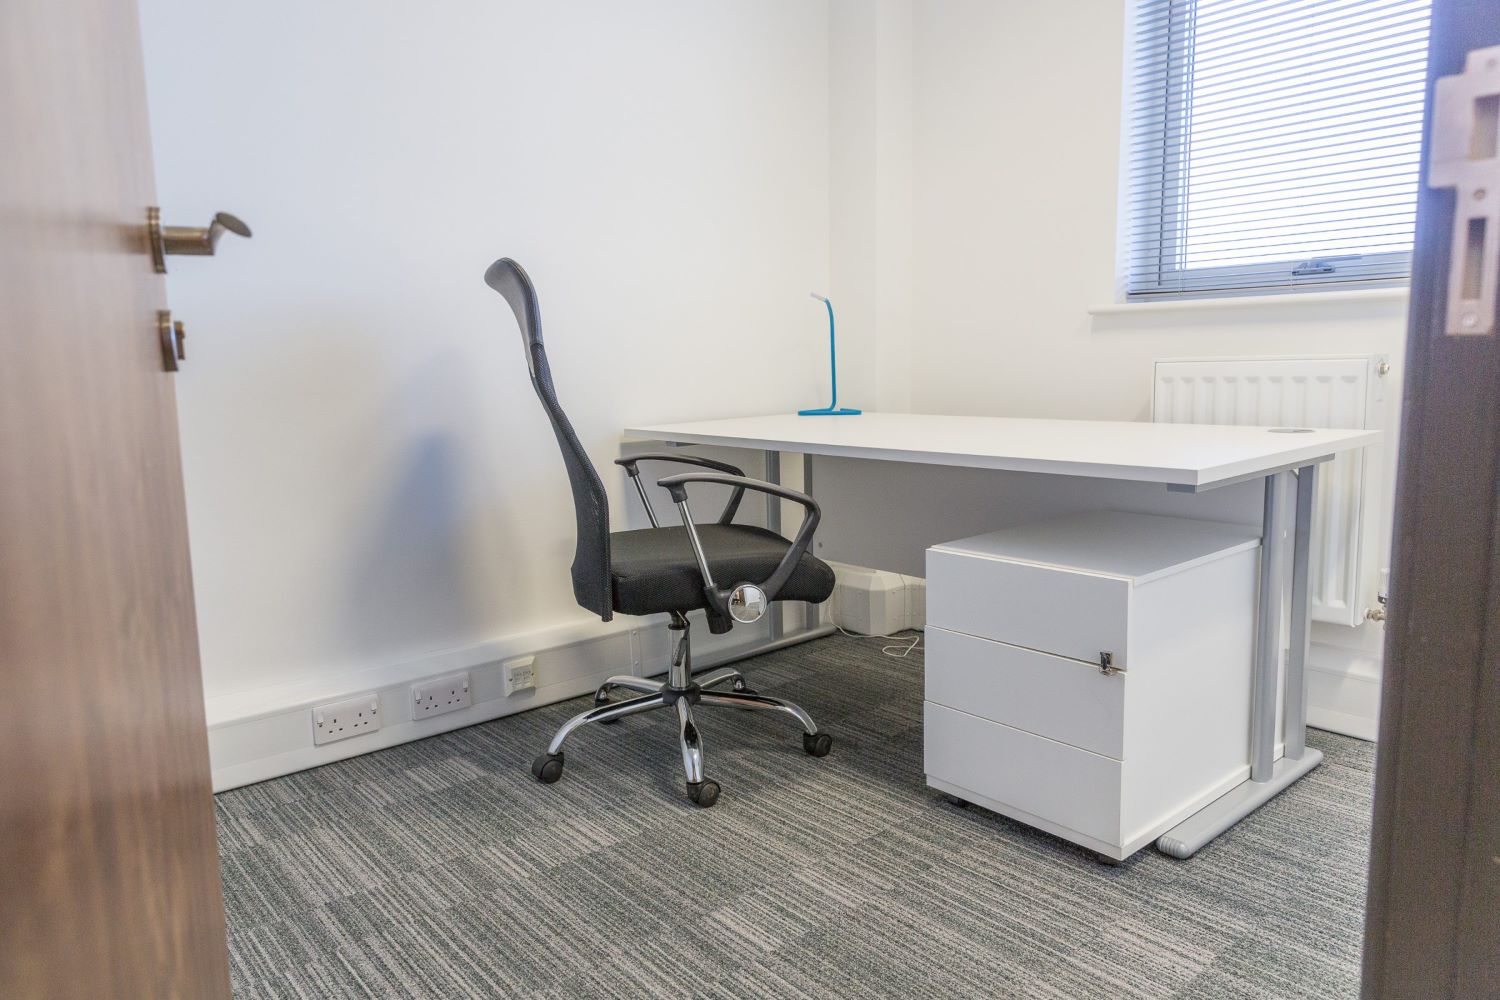 Serviced Offices in Swindon,Wiltshire